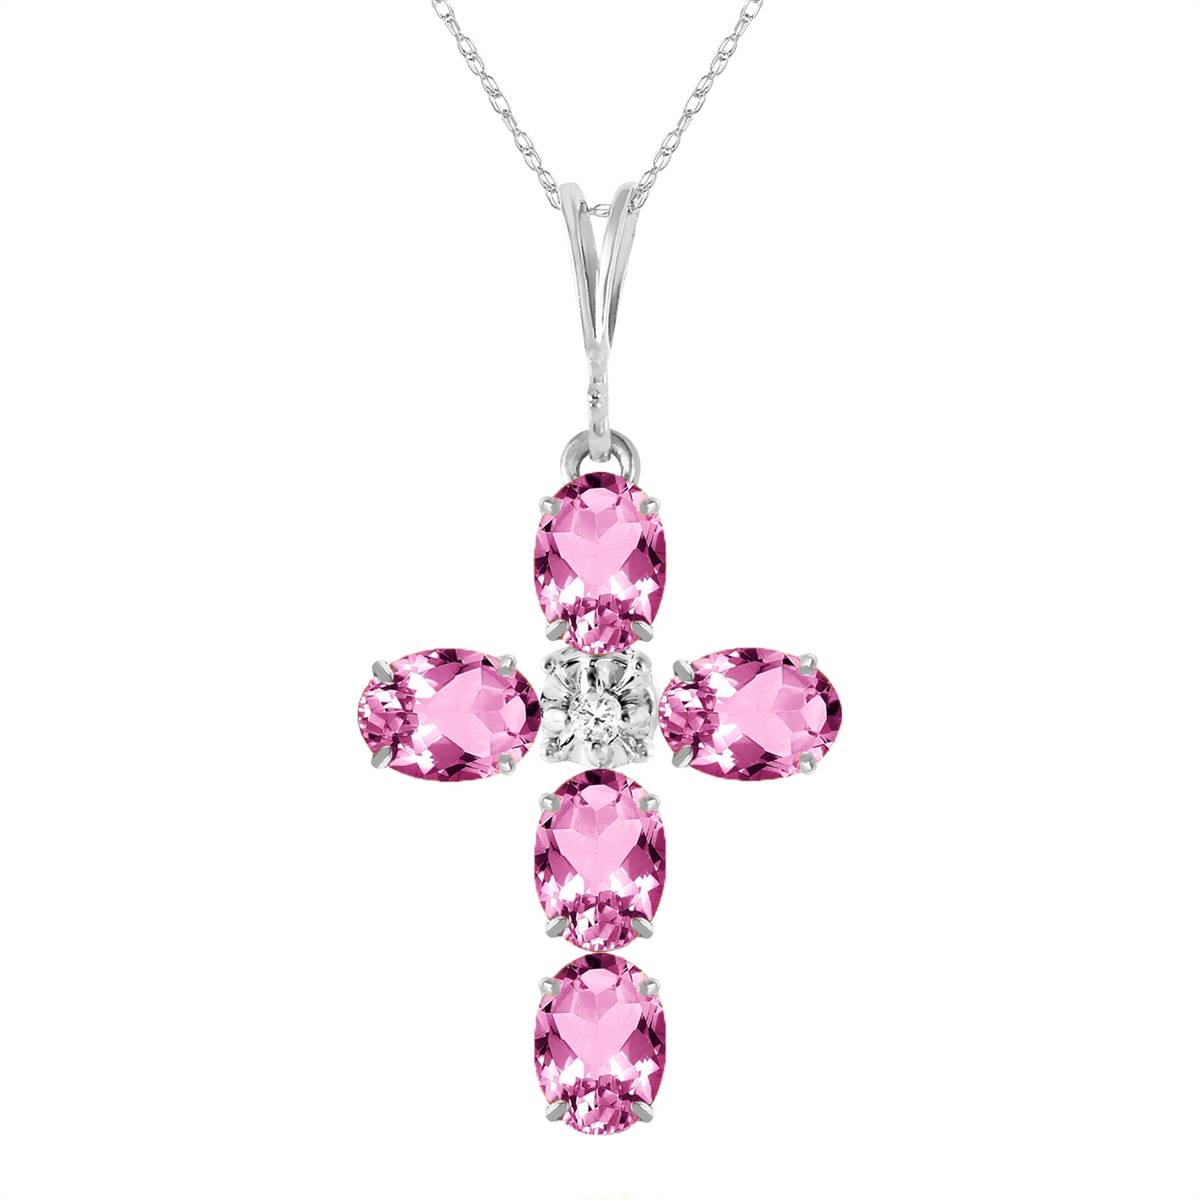 1.88 Carat 14K Solid White Gold Cross Necklace Natural Diamond Pink Topaz